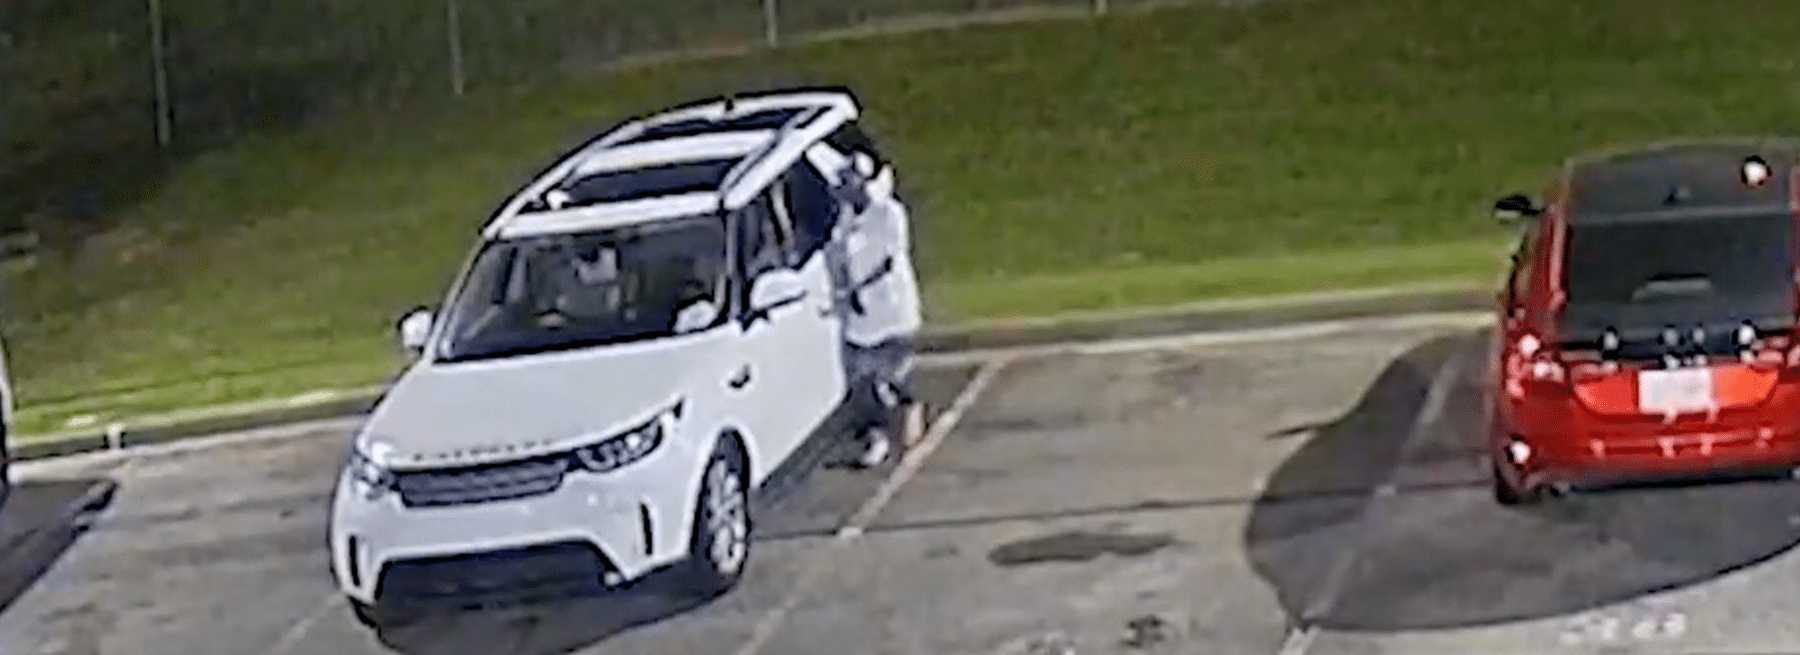 Person breaking into vehicle at Tennessee auto dealership